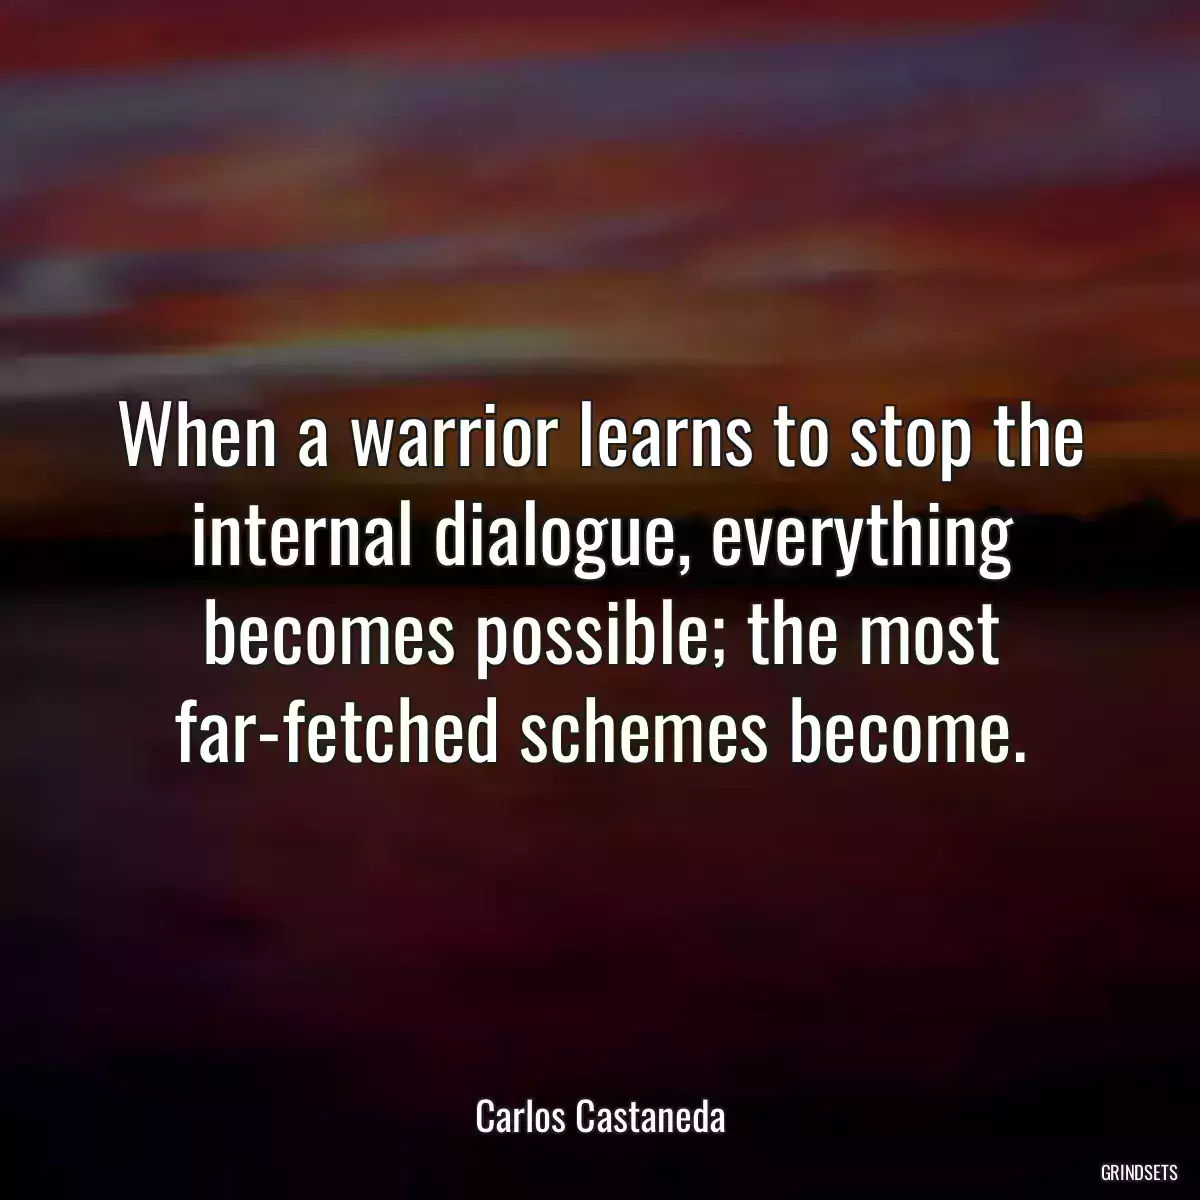 When a warrior learns to stop the internal dialogue, everything becomes possible; the most far-fetched schemes become.